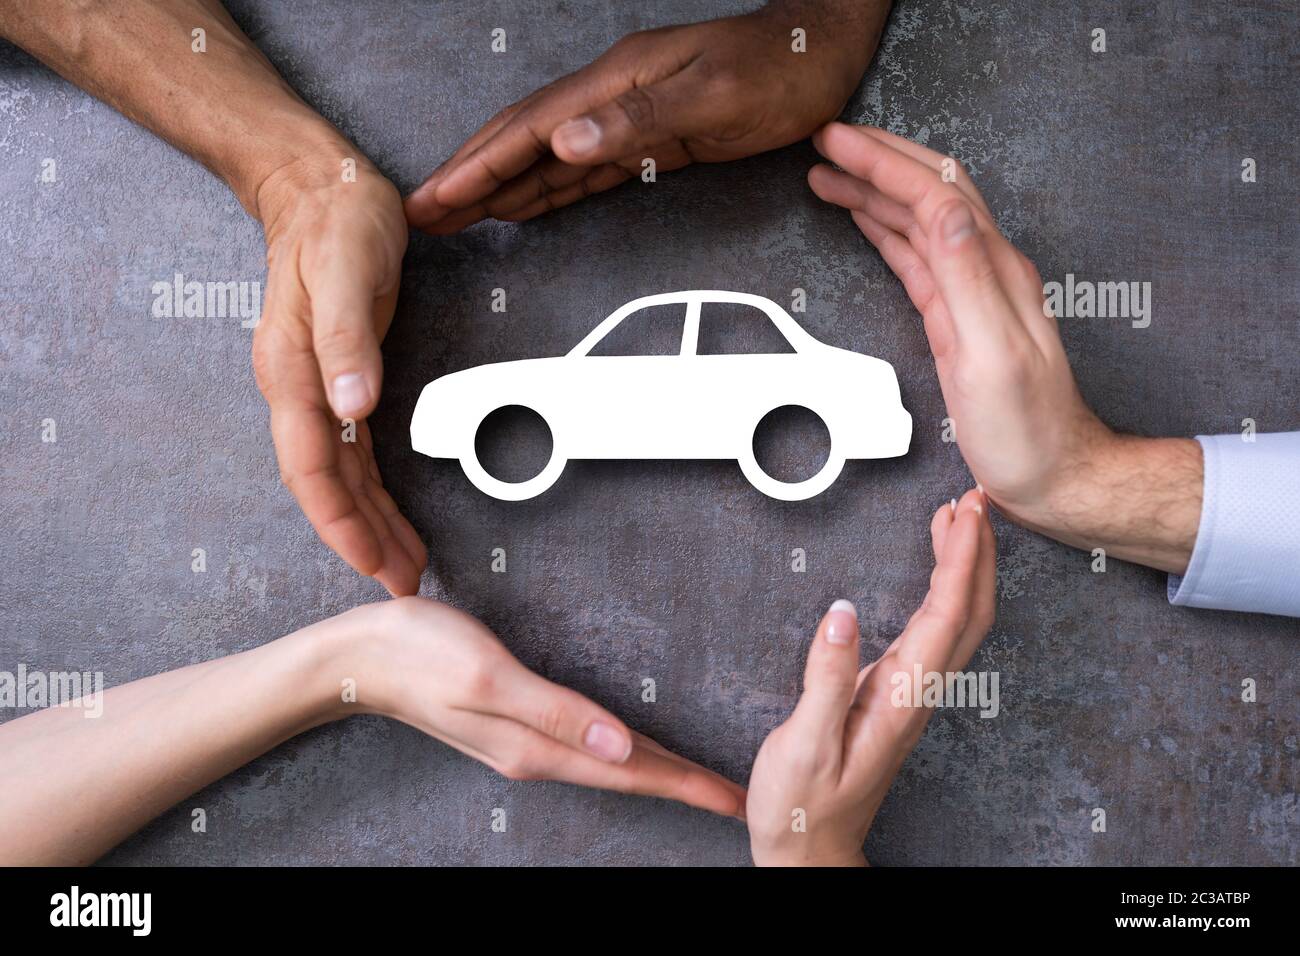 People Hands Protecting Cutout Car Shape At Desk Stock Photo